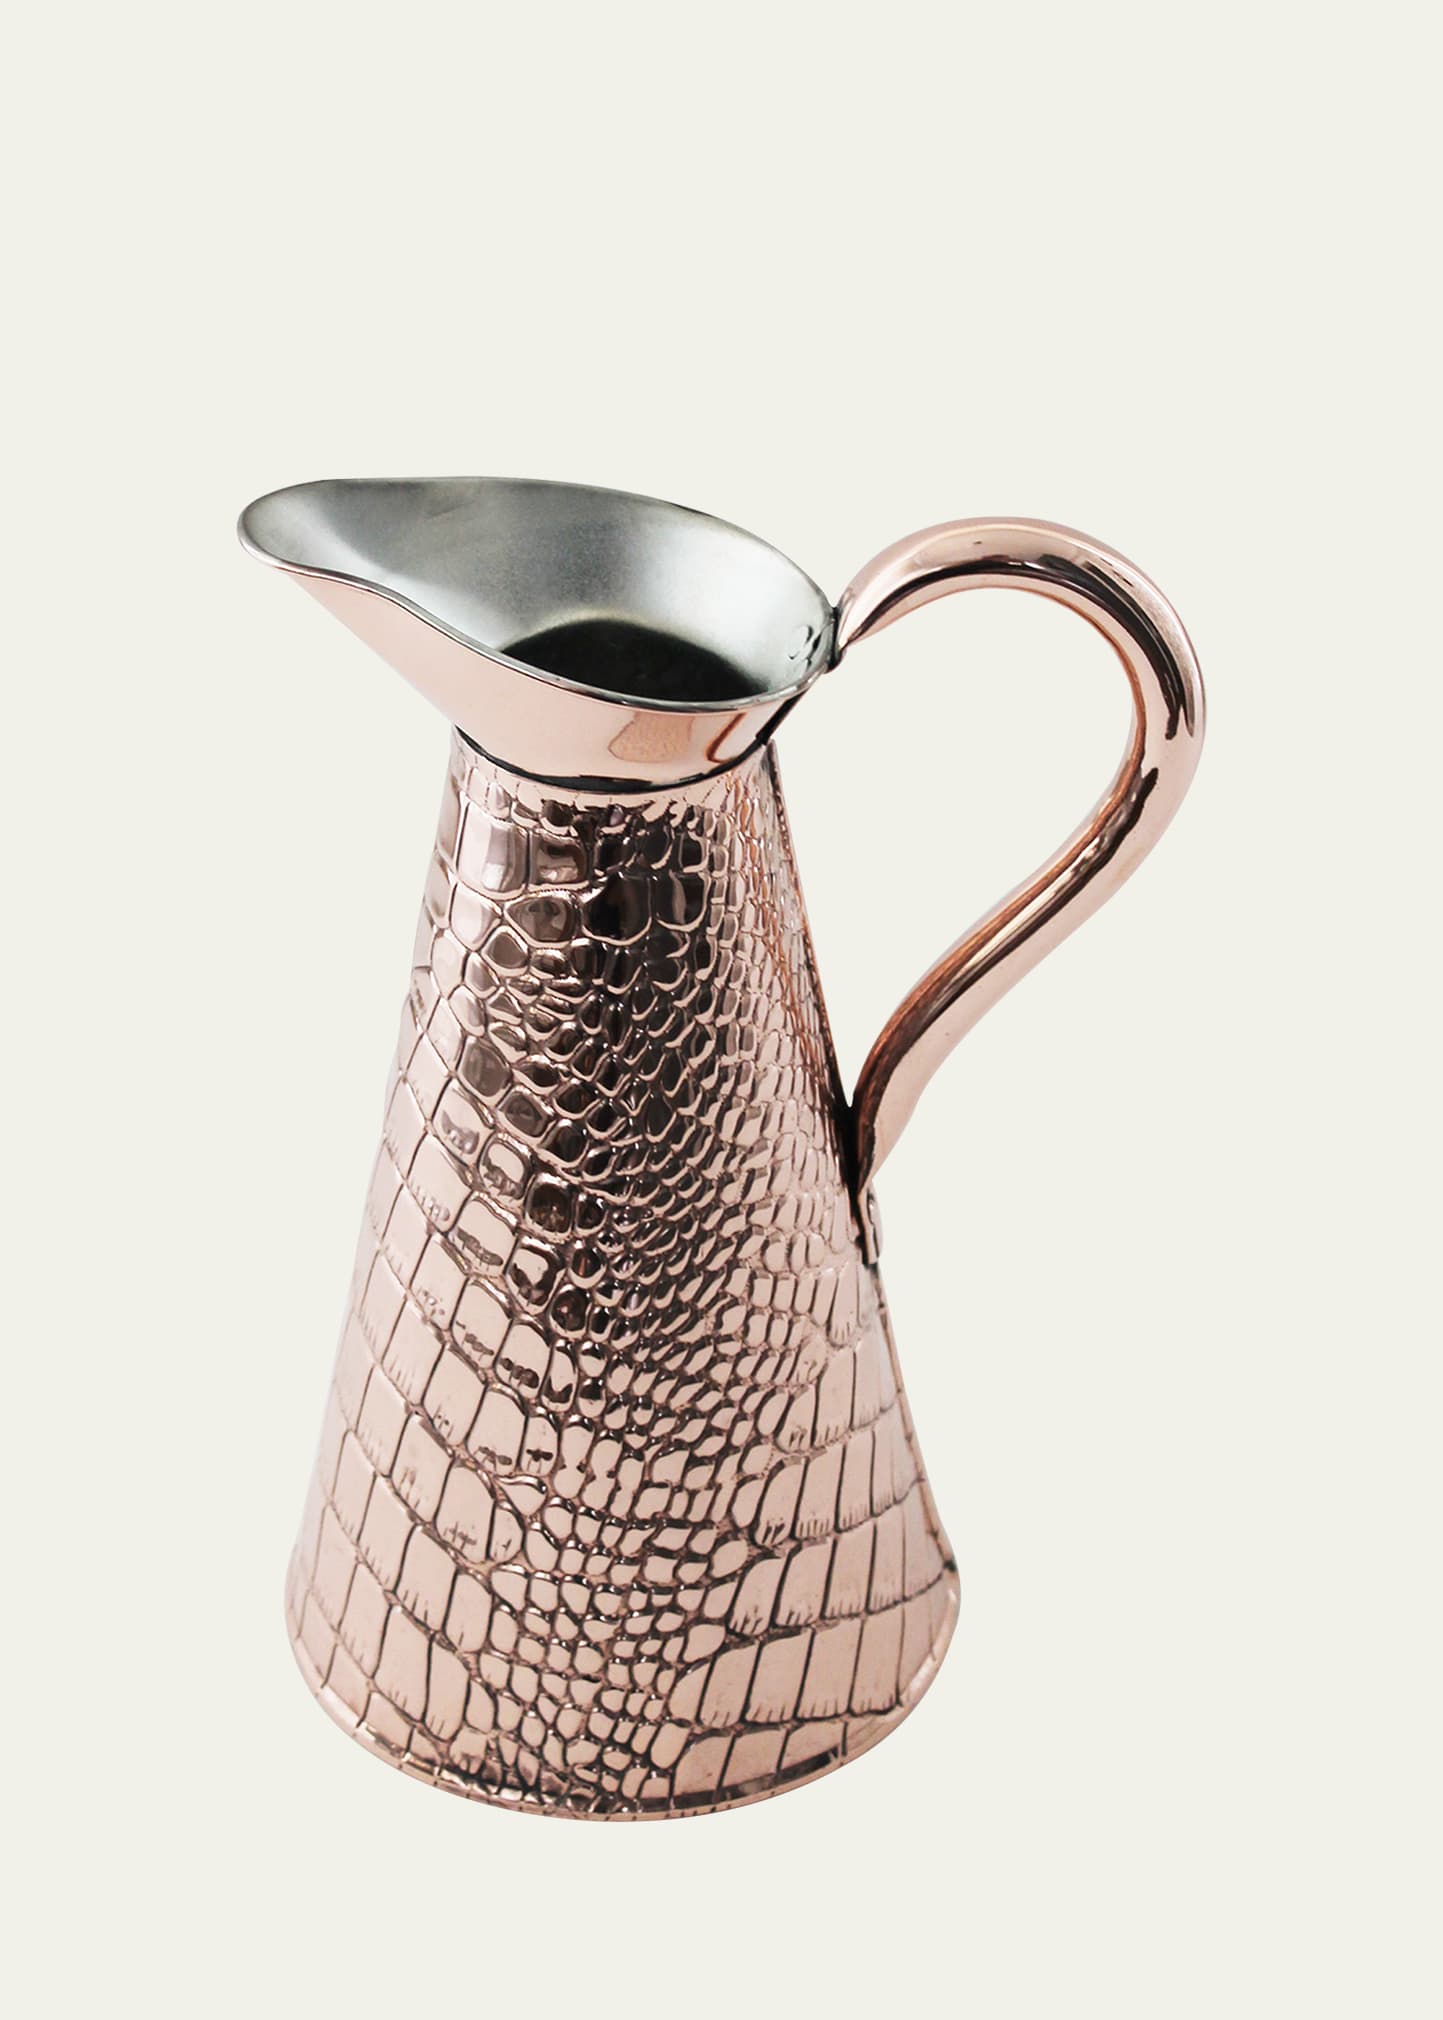 Shop Coppermill Kitchen Antique English Js & S Embossed Pitcher, Late 19th Century In Copper